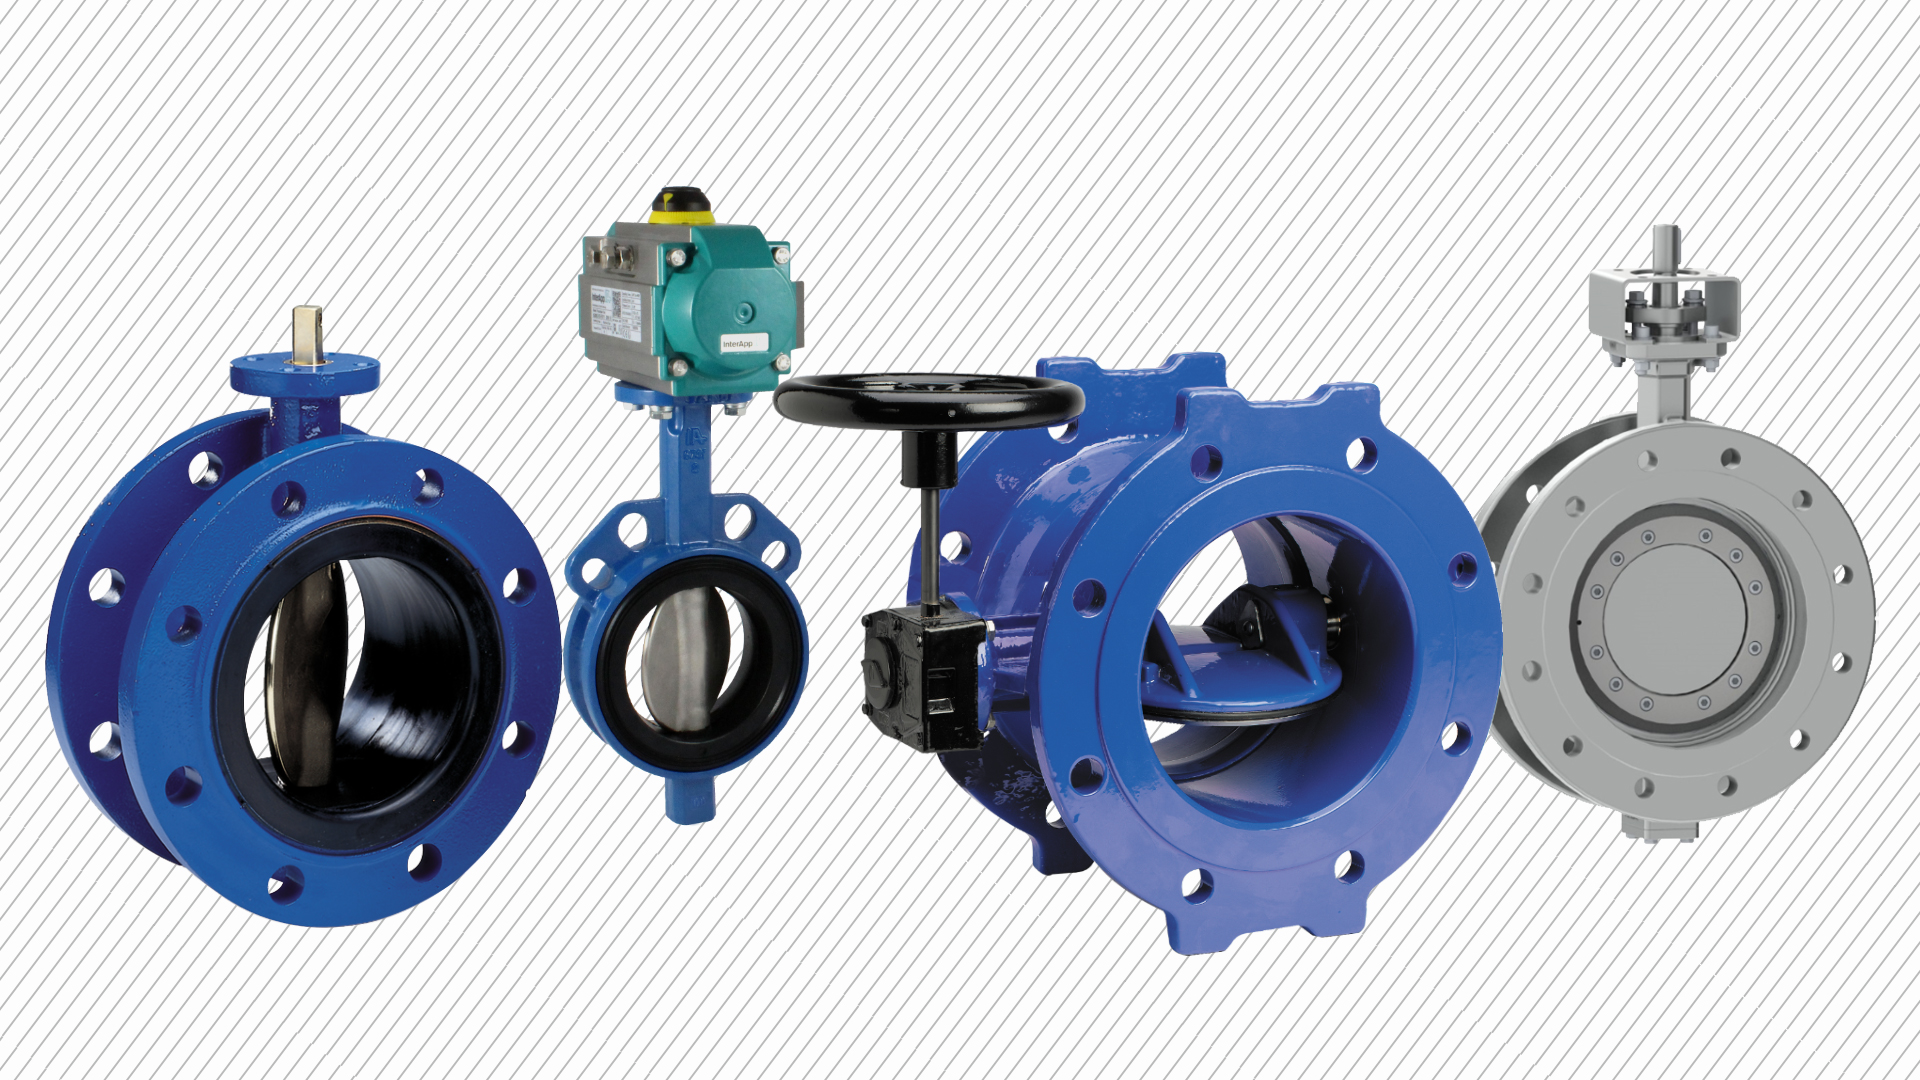 Close-up photo of an AVK double eccentric butterfly valve